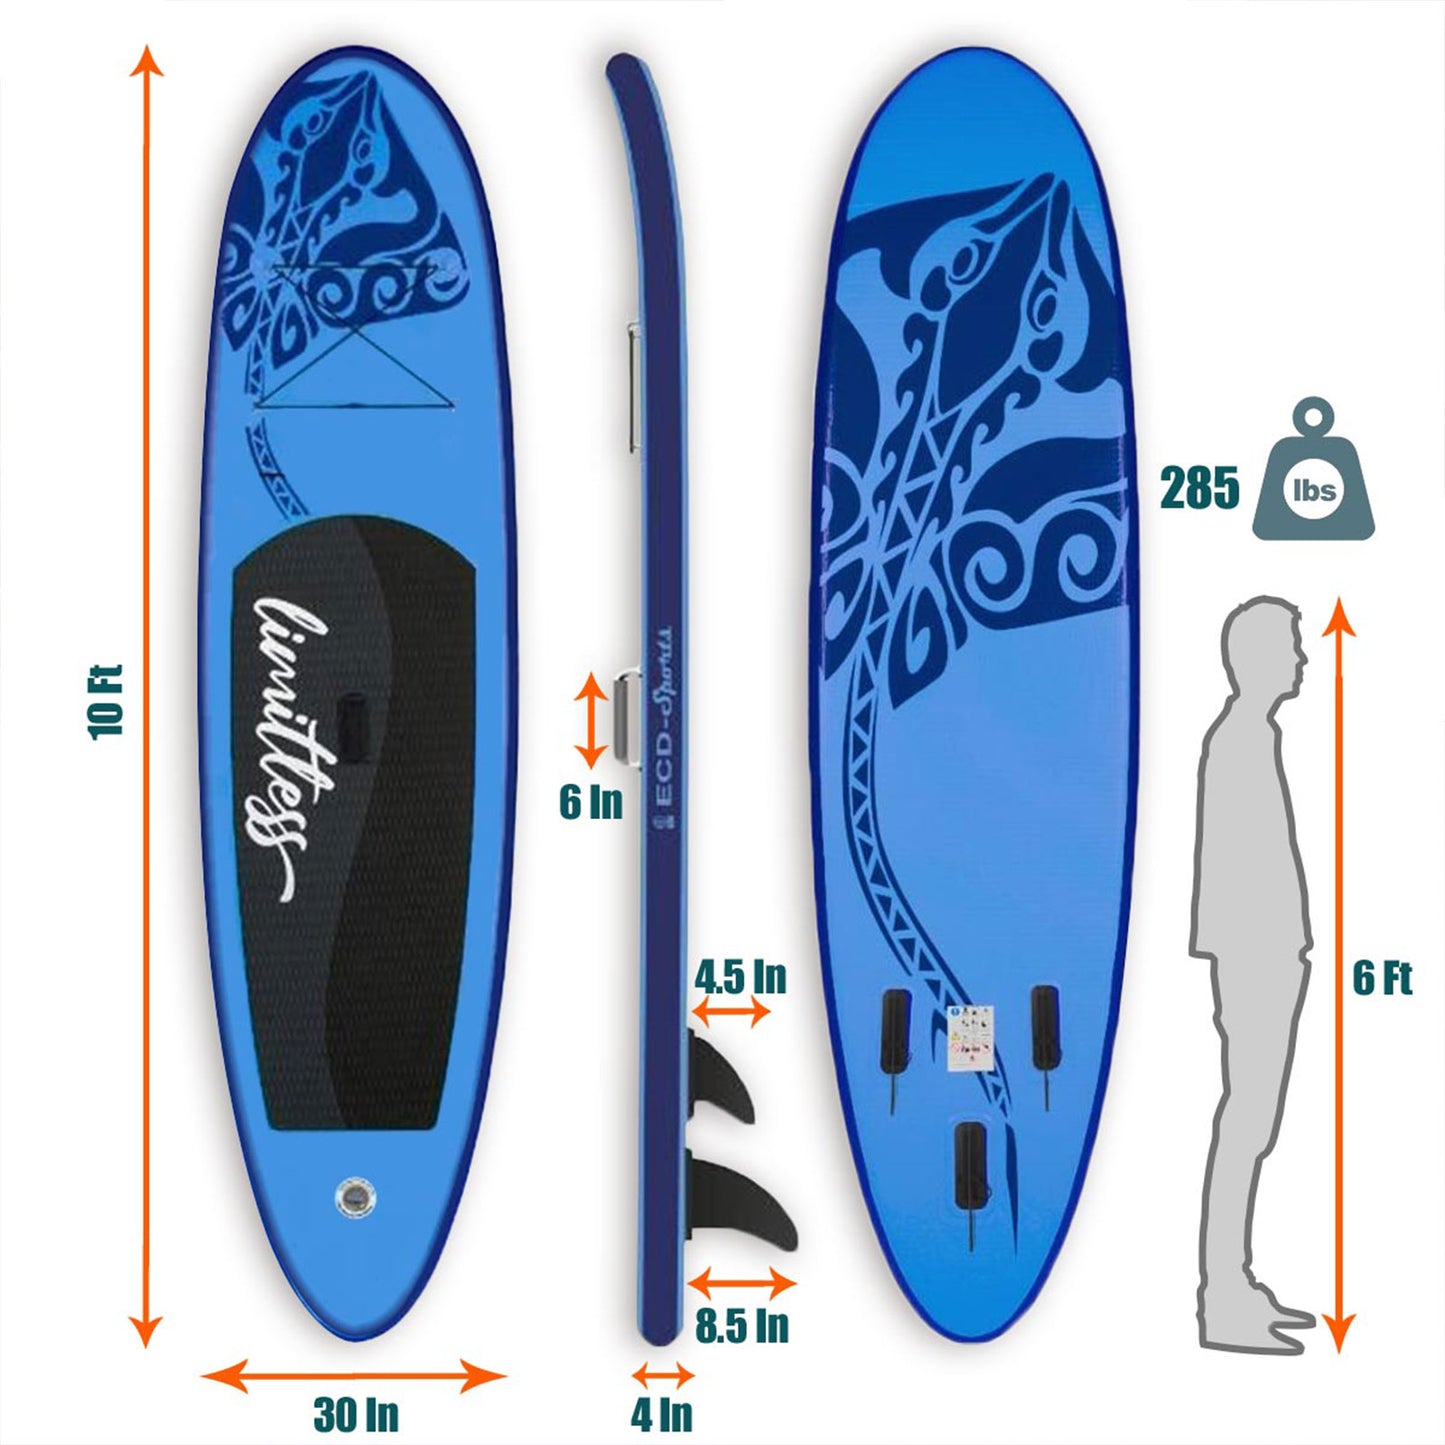 TGO Gear 10' iSUP Inflatable Stand Up Paddle Board - All-Around Versatility, Anti-Slip Deck, 3 Fins - Includes Pump, Leash, Backpack, Repair Kit - Blue Whale